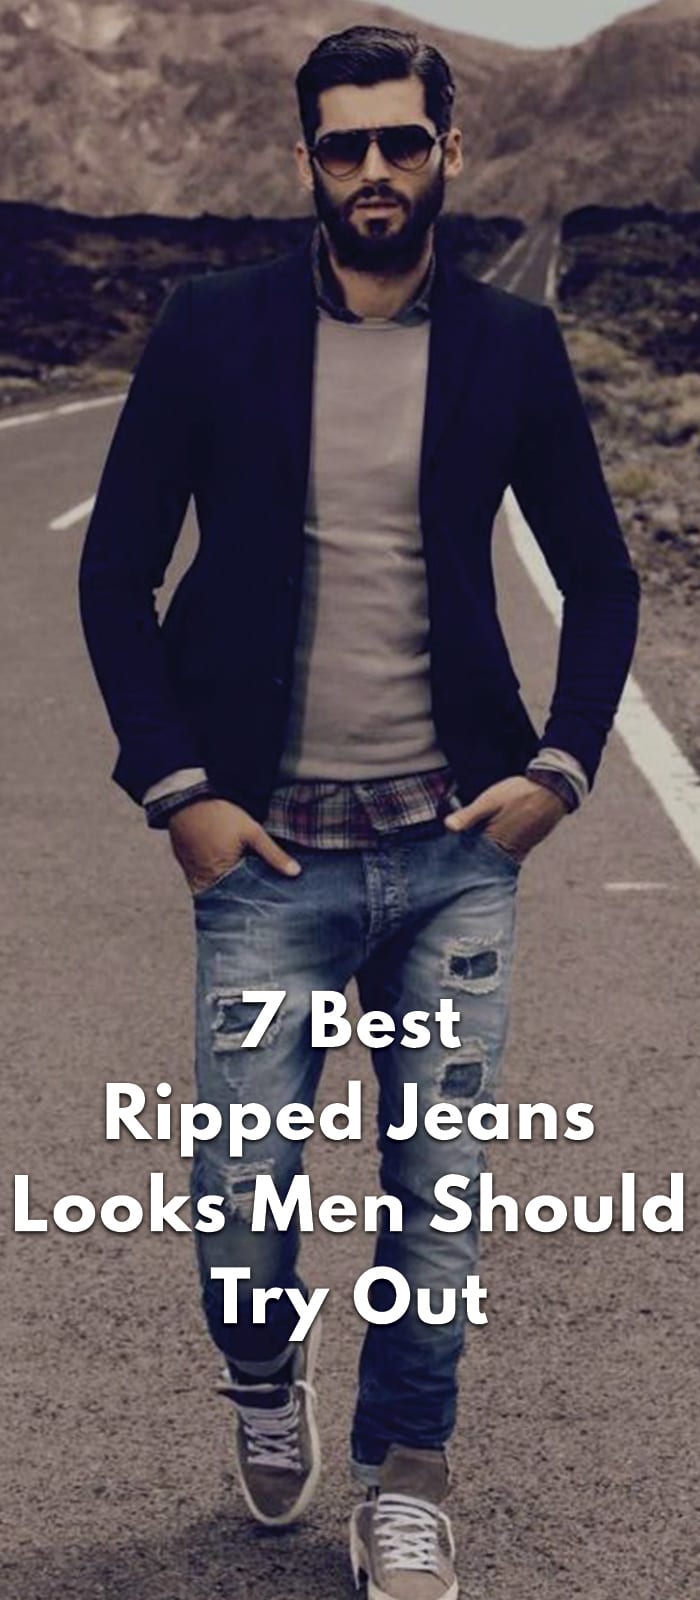 Best Ripped Jeans Looks Men Should Try Out In 2018